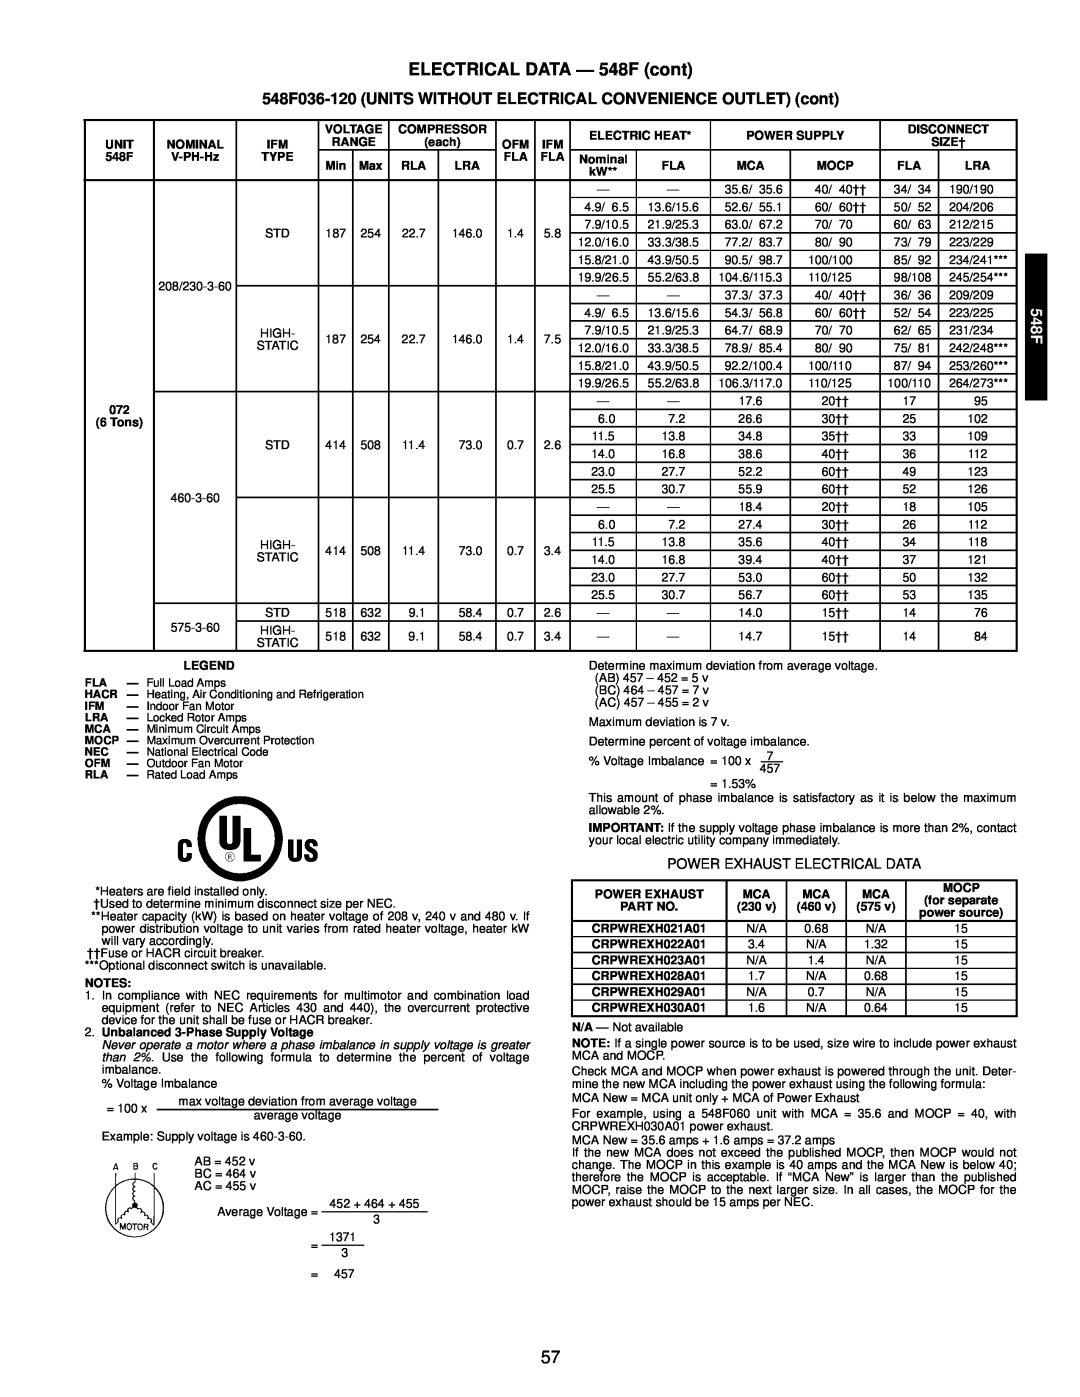 Bryant 549C manual ELECTRICAL DATA — 548F cont, Power Exhaust Electrical Data 